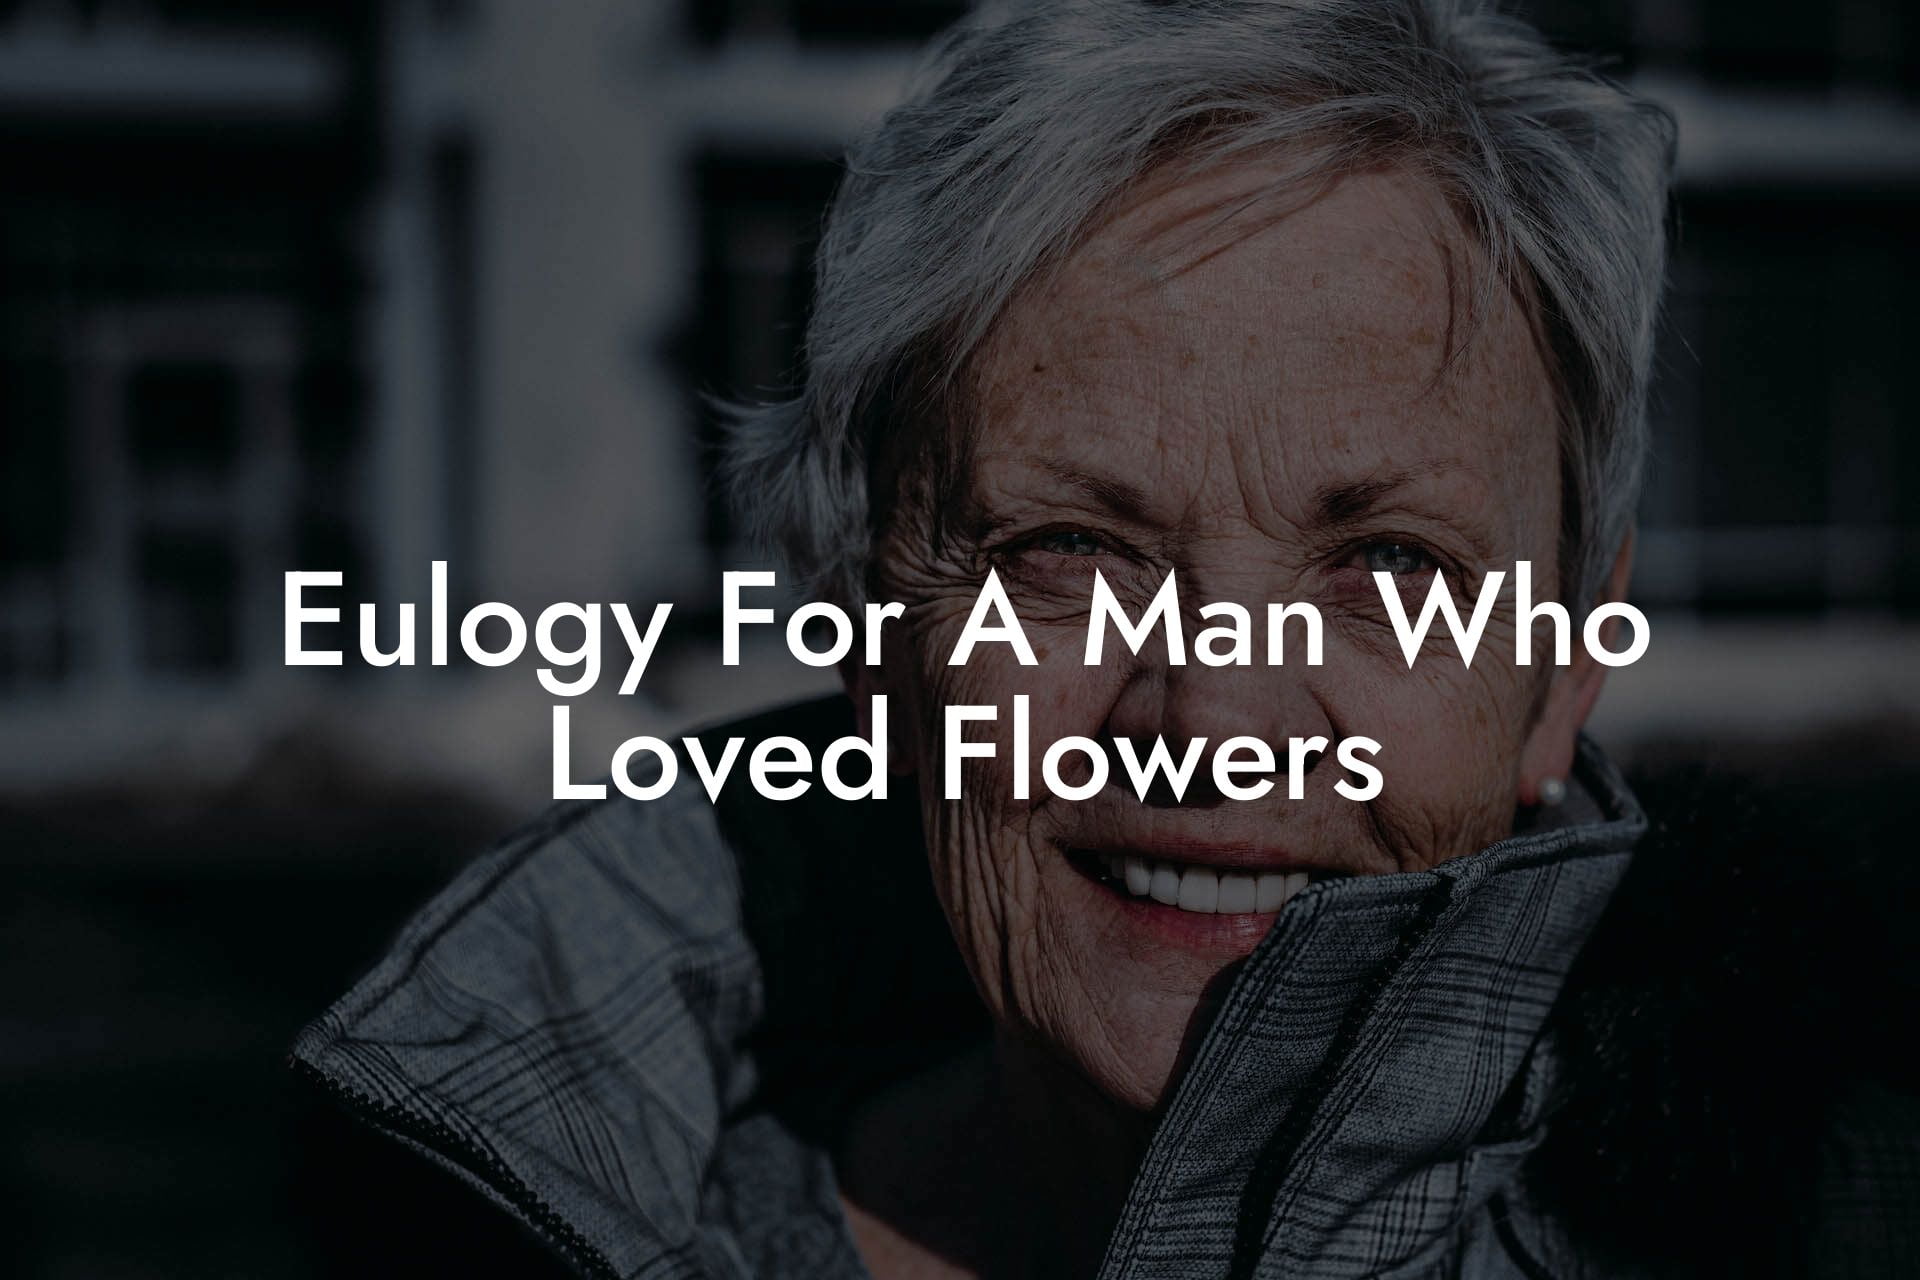 Eulogy For A Man Who Loved Flowers